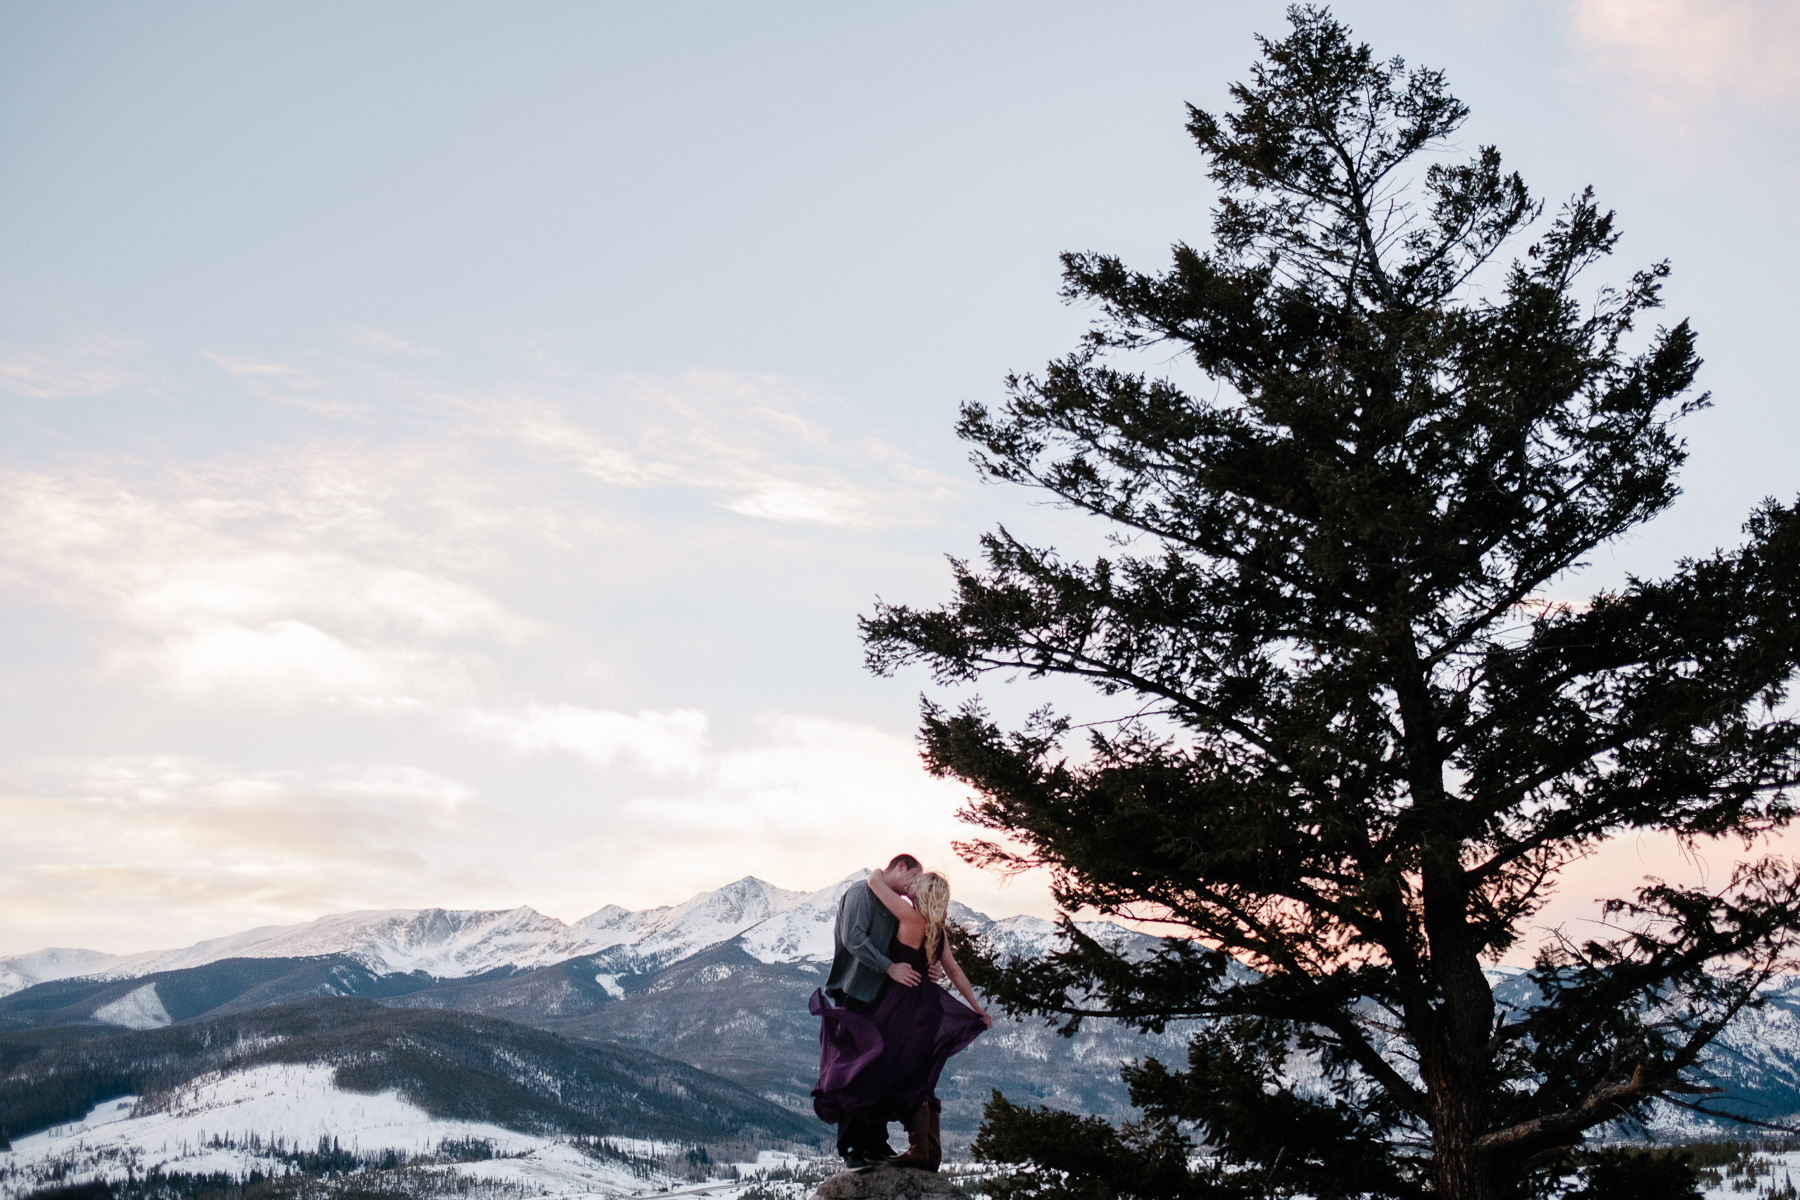 Caryn and Nate explore Breckenridge during their adventure engagement session.